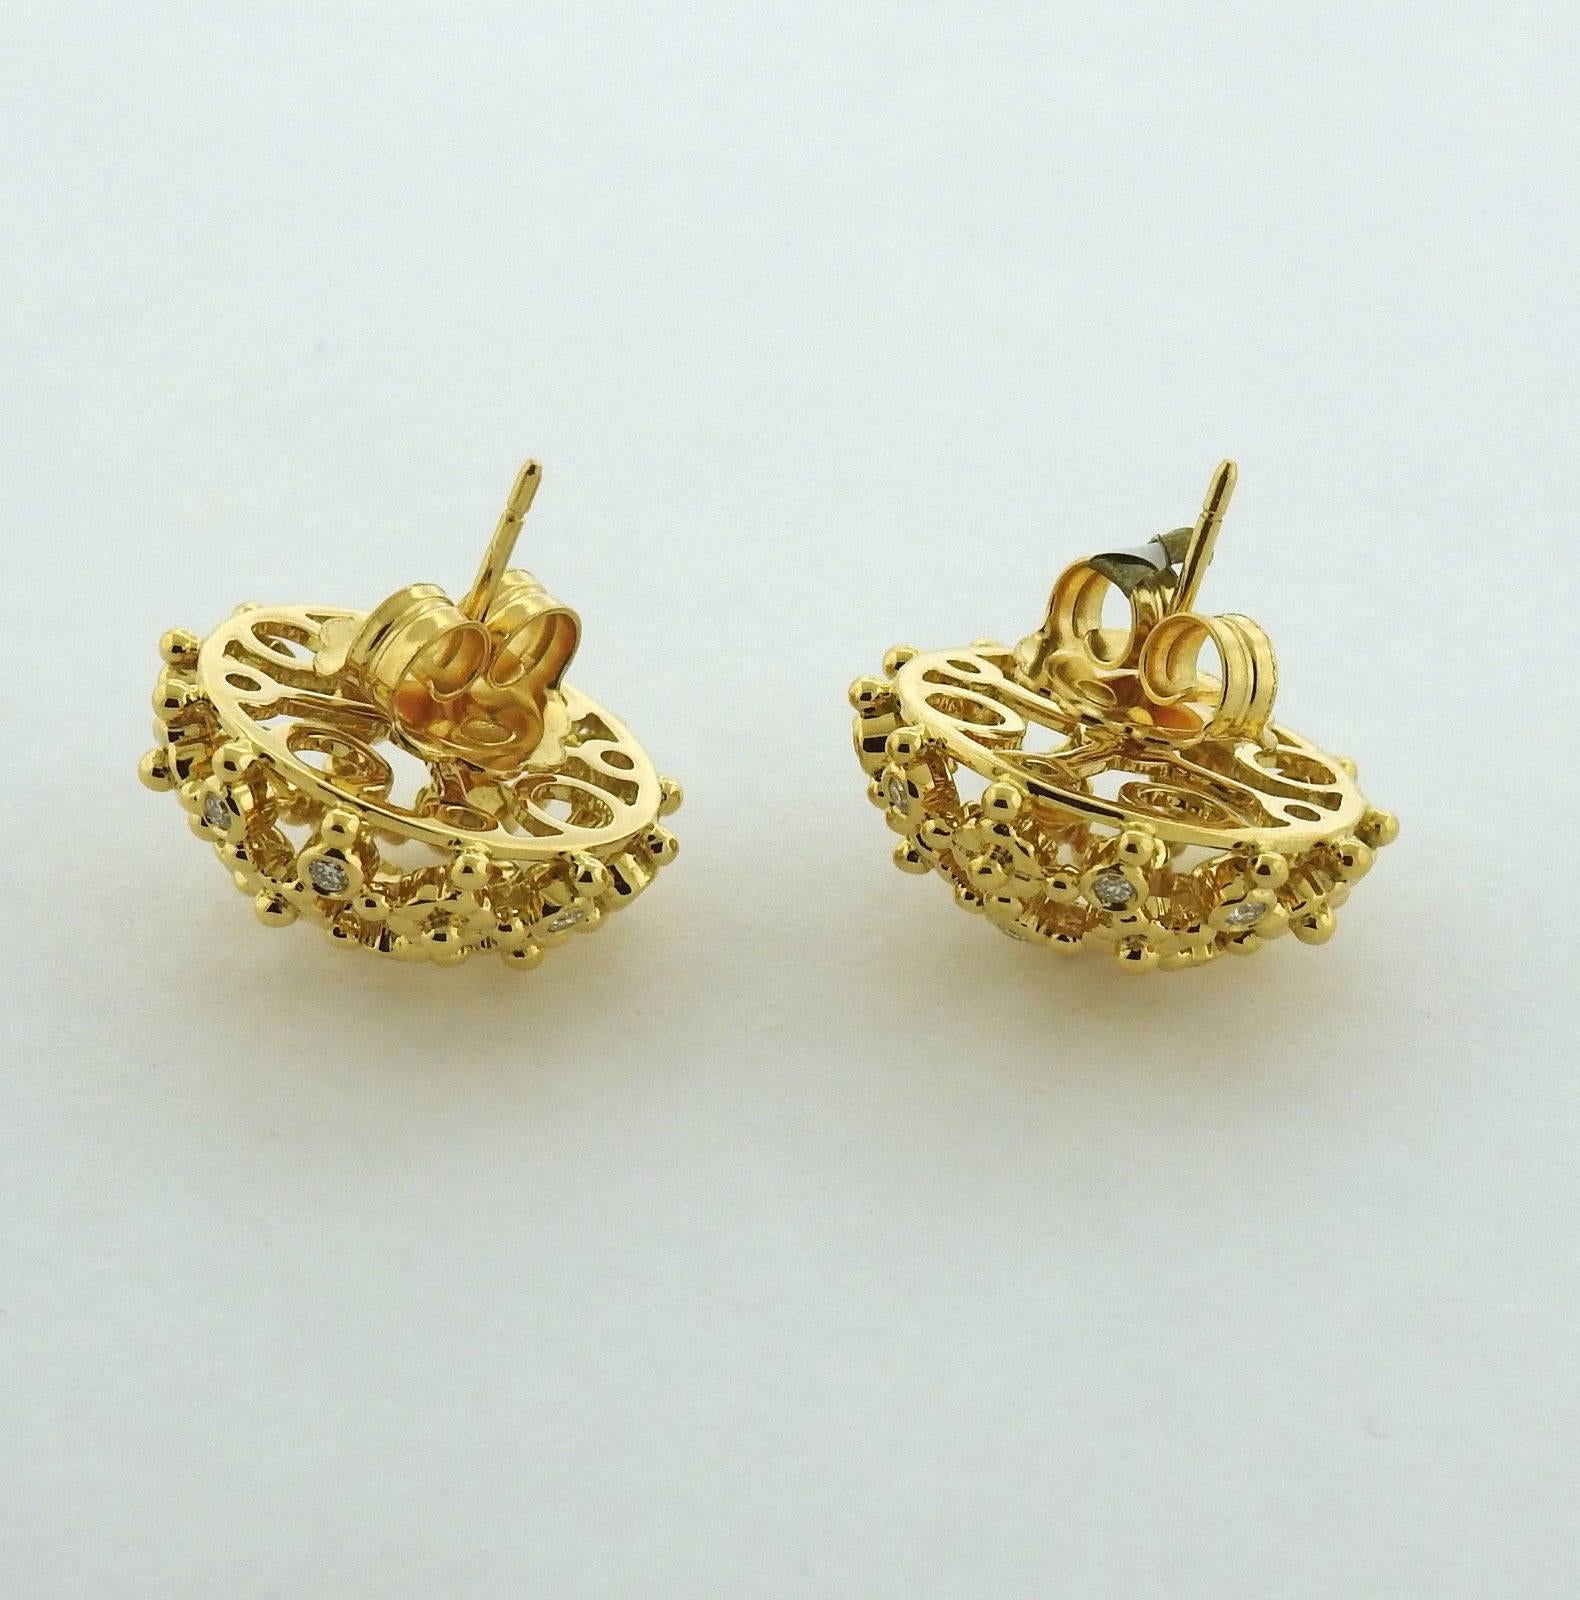 A pair of 18k yellow gold earrings set with 0.64ctw of G/VS diamonds.  The earrings are 20mm in diameter and weigh 13.5 grams.  The earrings currently retail for $4950.